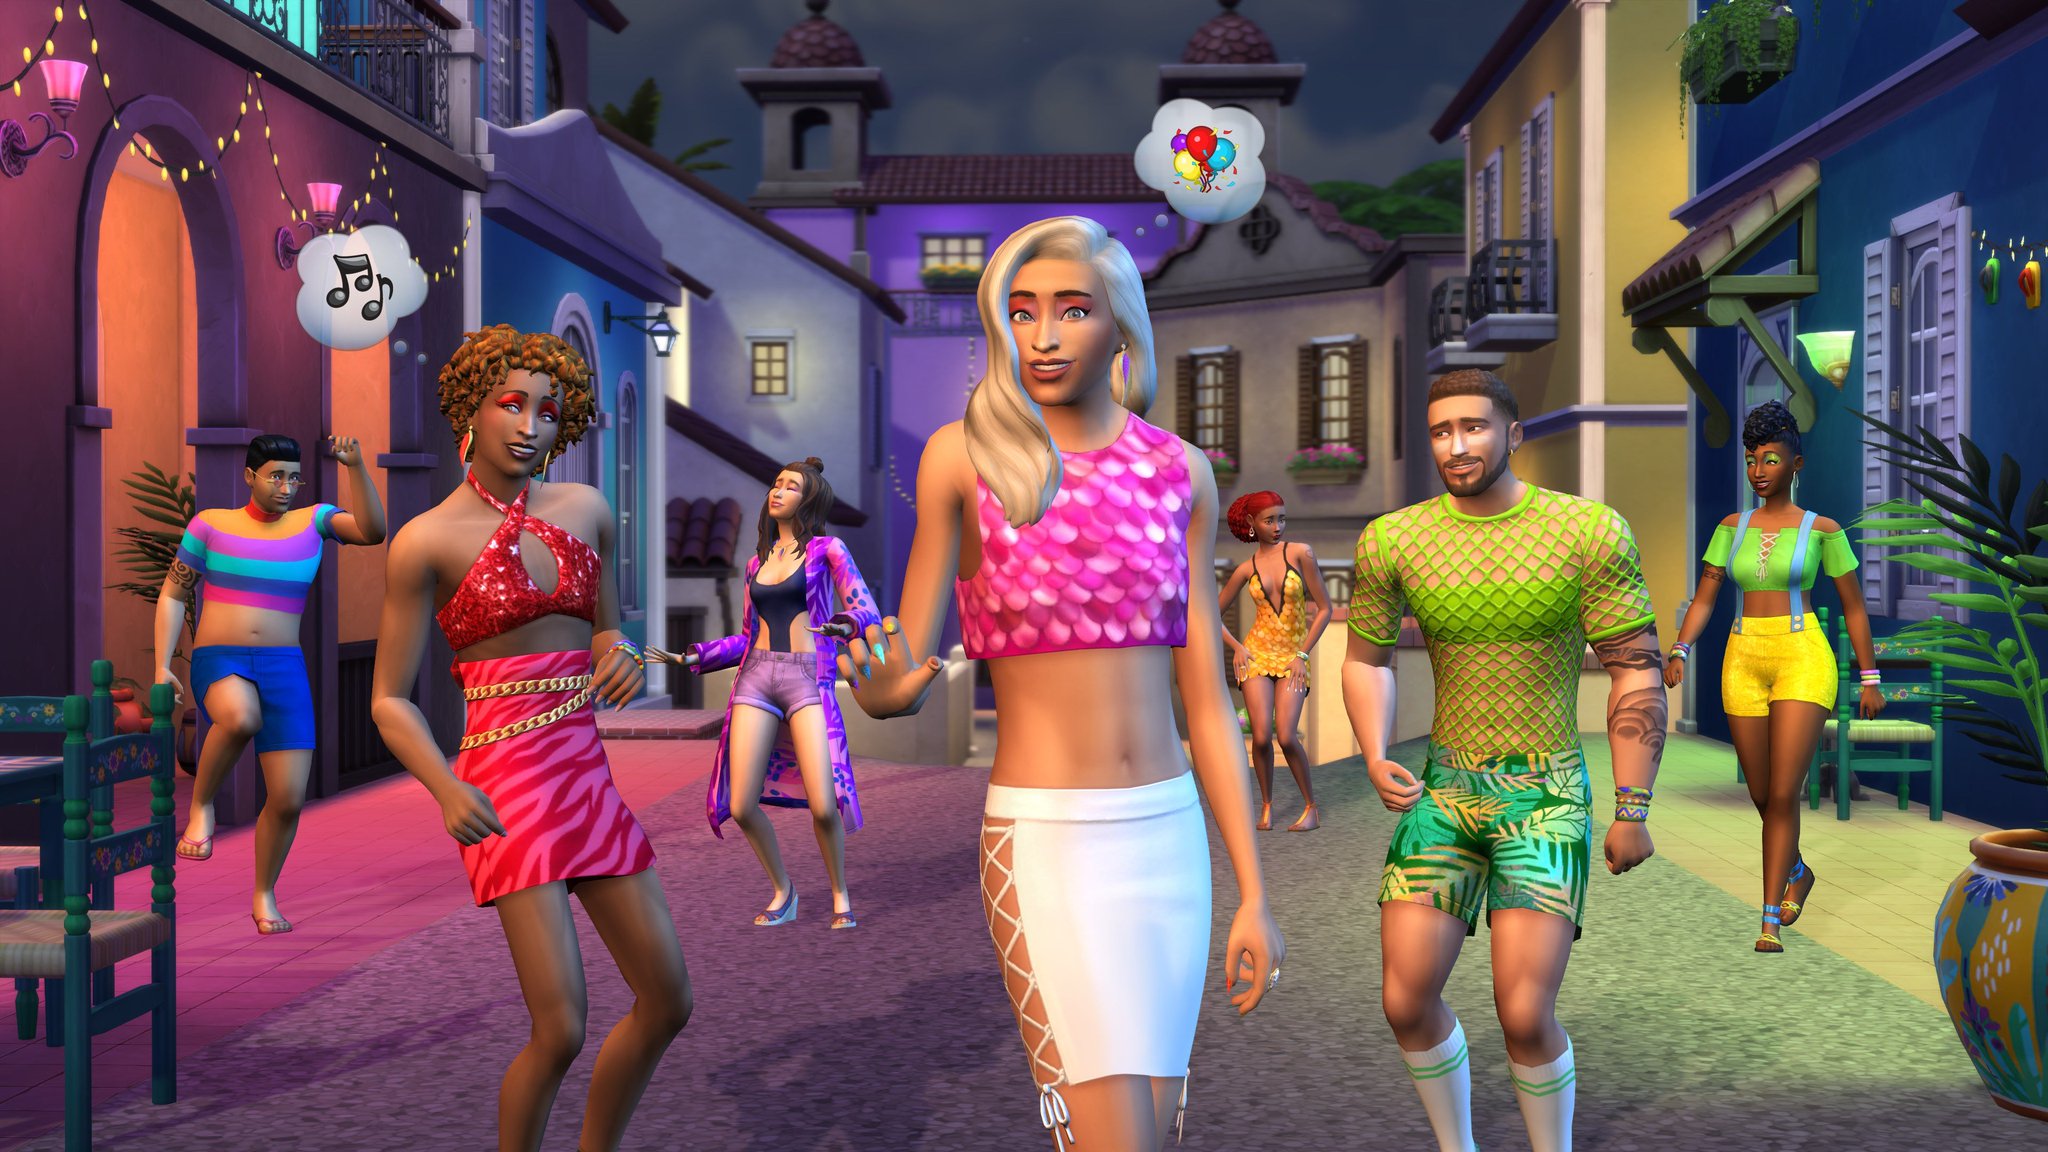 The Sims 4 Carnaval Streetwear Kit has a leaked screenshot, and it does NOT look nice...